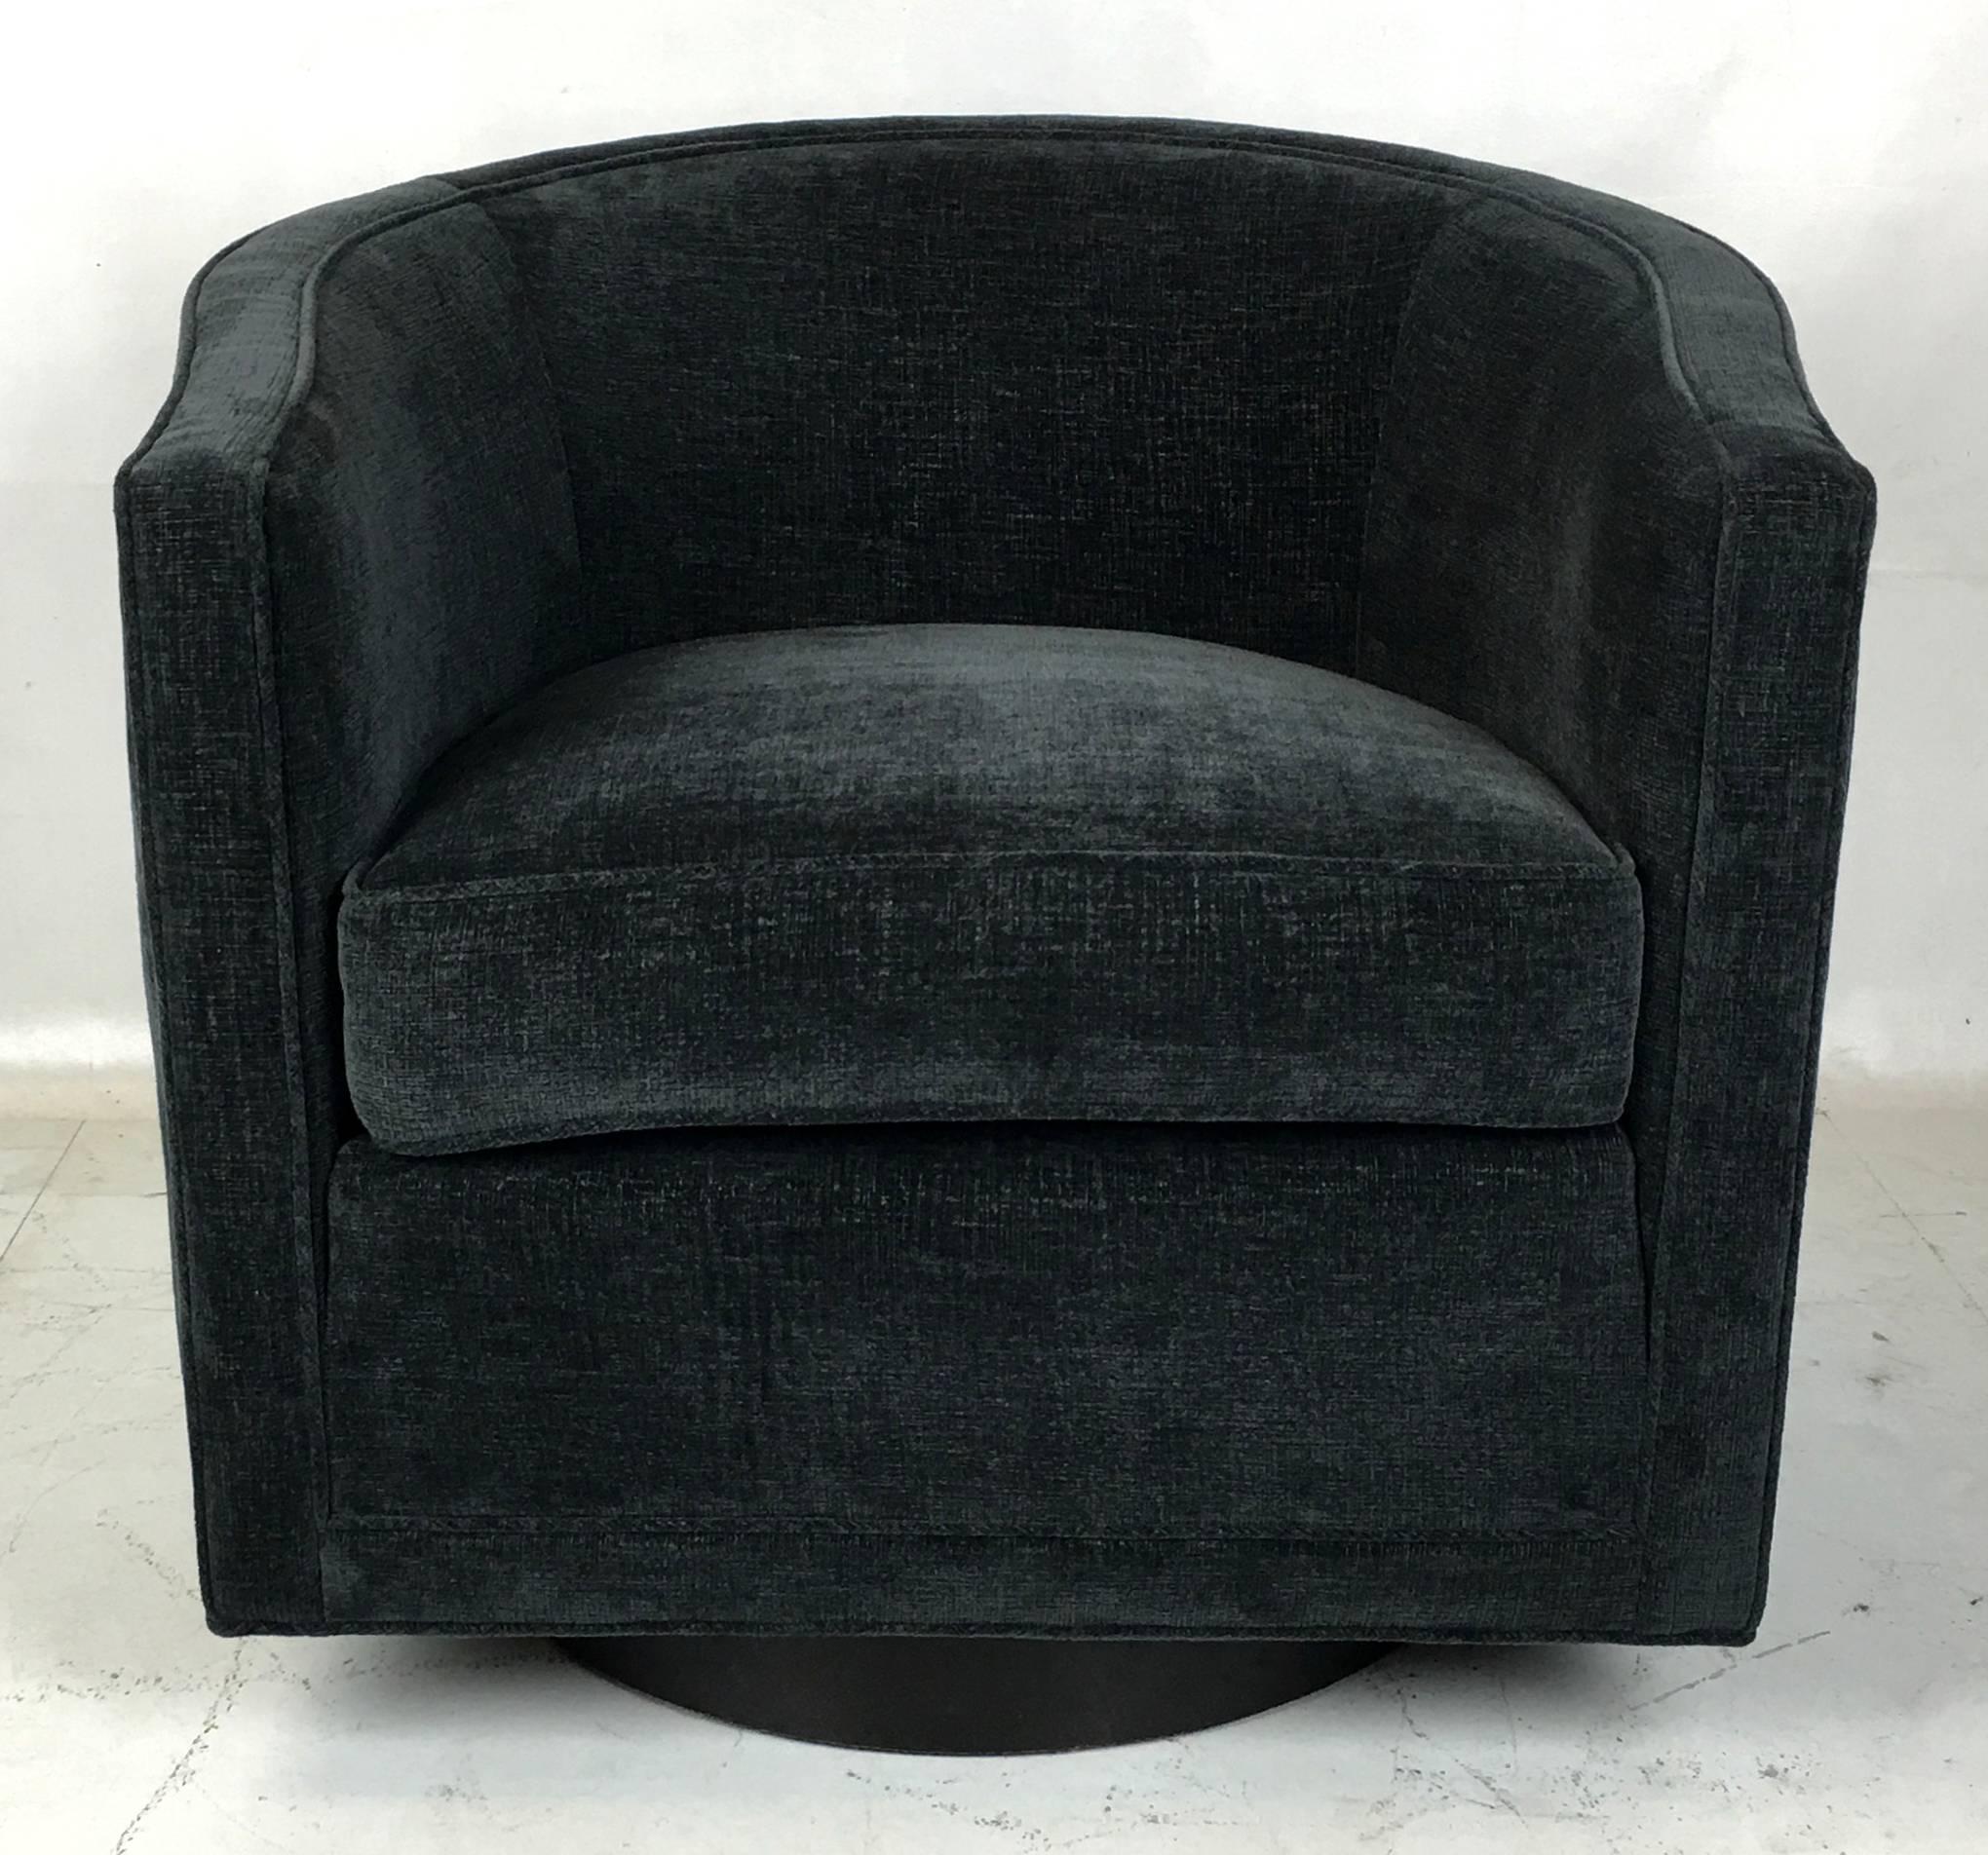 Classic swivel chair by Dunbar raised on a ebonized walnut drum base. The chair has been meticulously restored and reupholstered in a heavy weight dark grey textured chenille.  All work done with painstaking attention to detail at our in-house